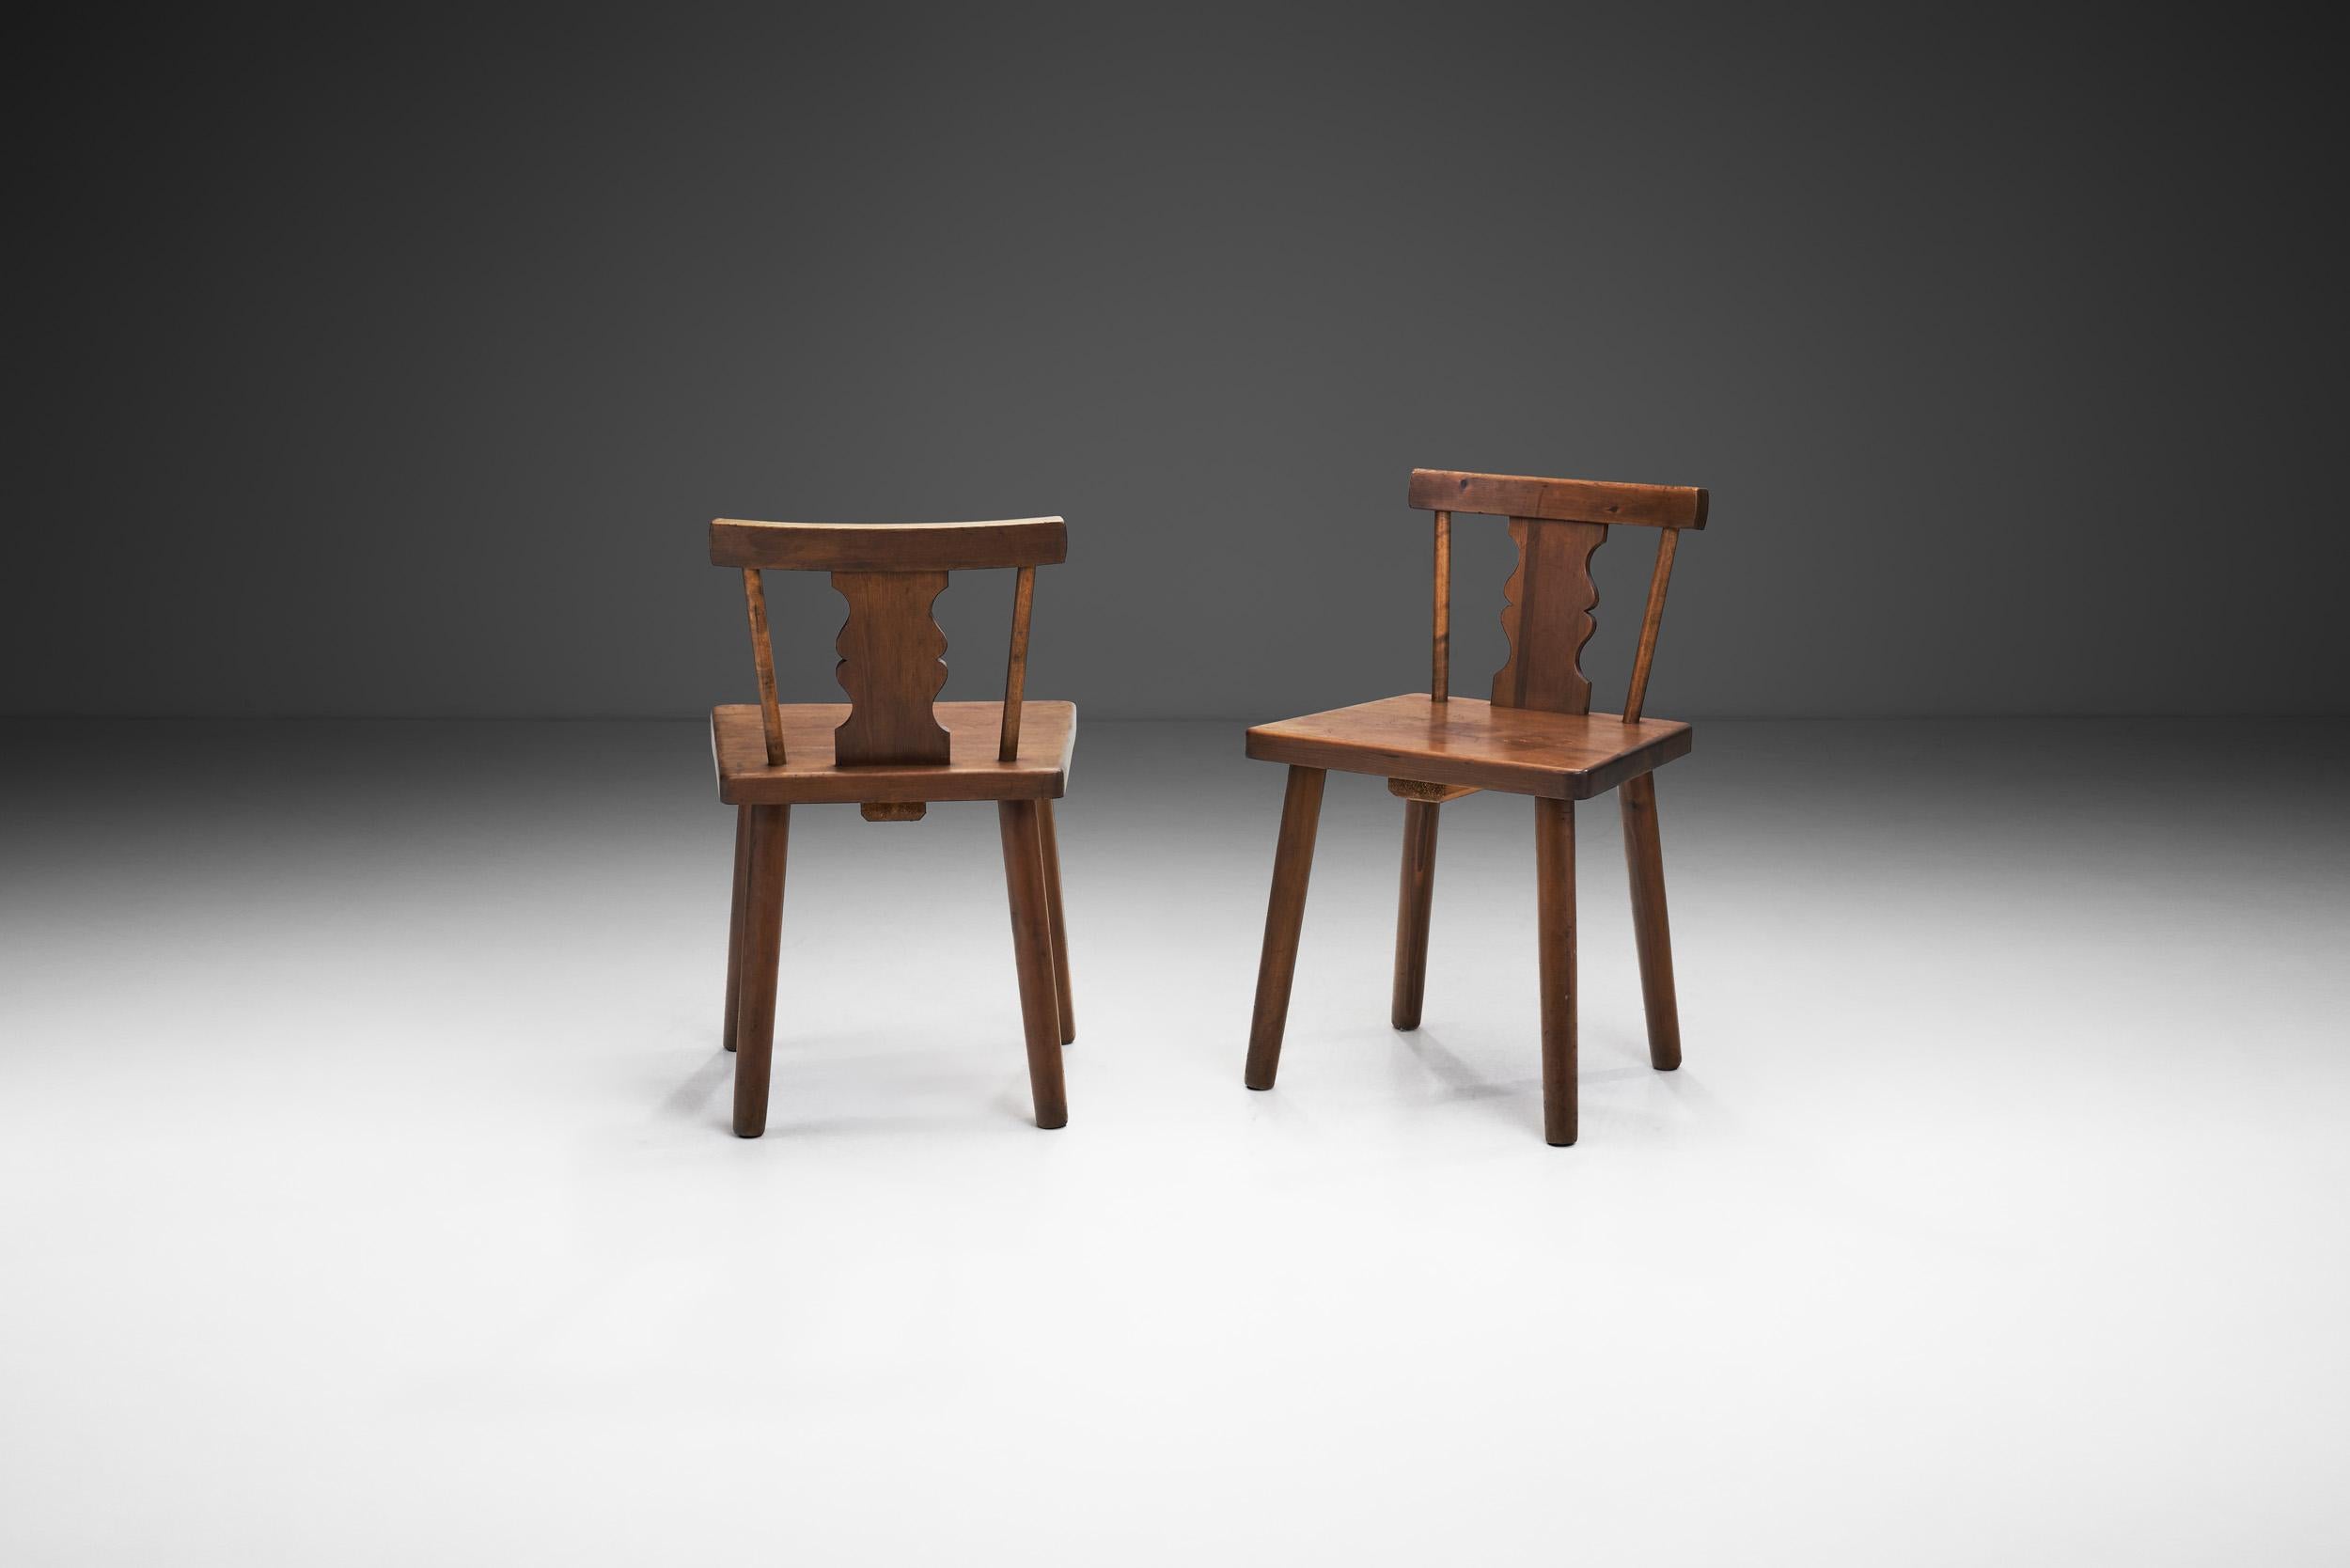 European Rustic Solid Pine Chairs with Carved Backs, Europe early 20th century For Sale